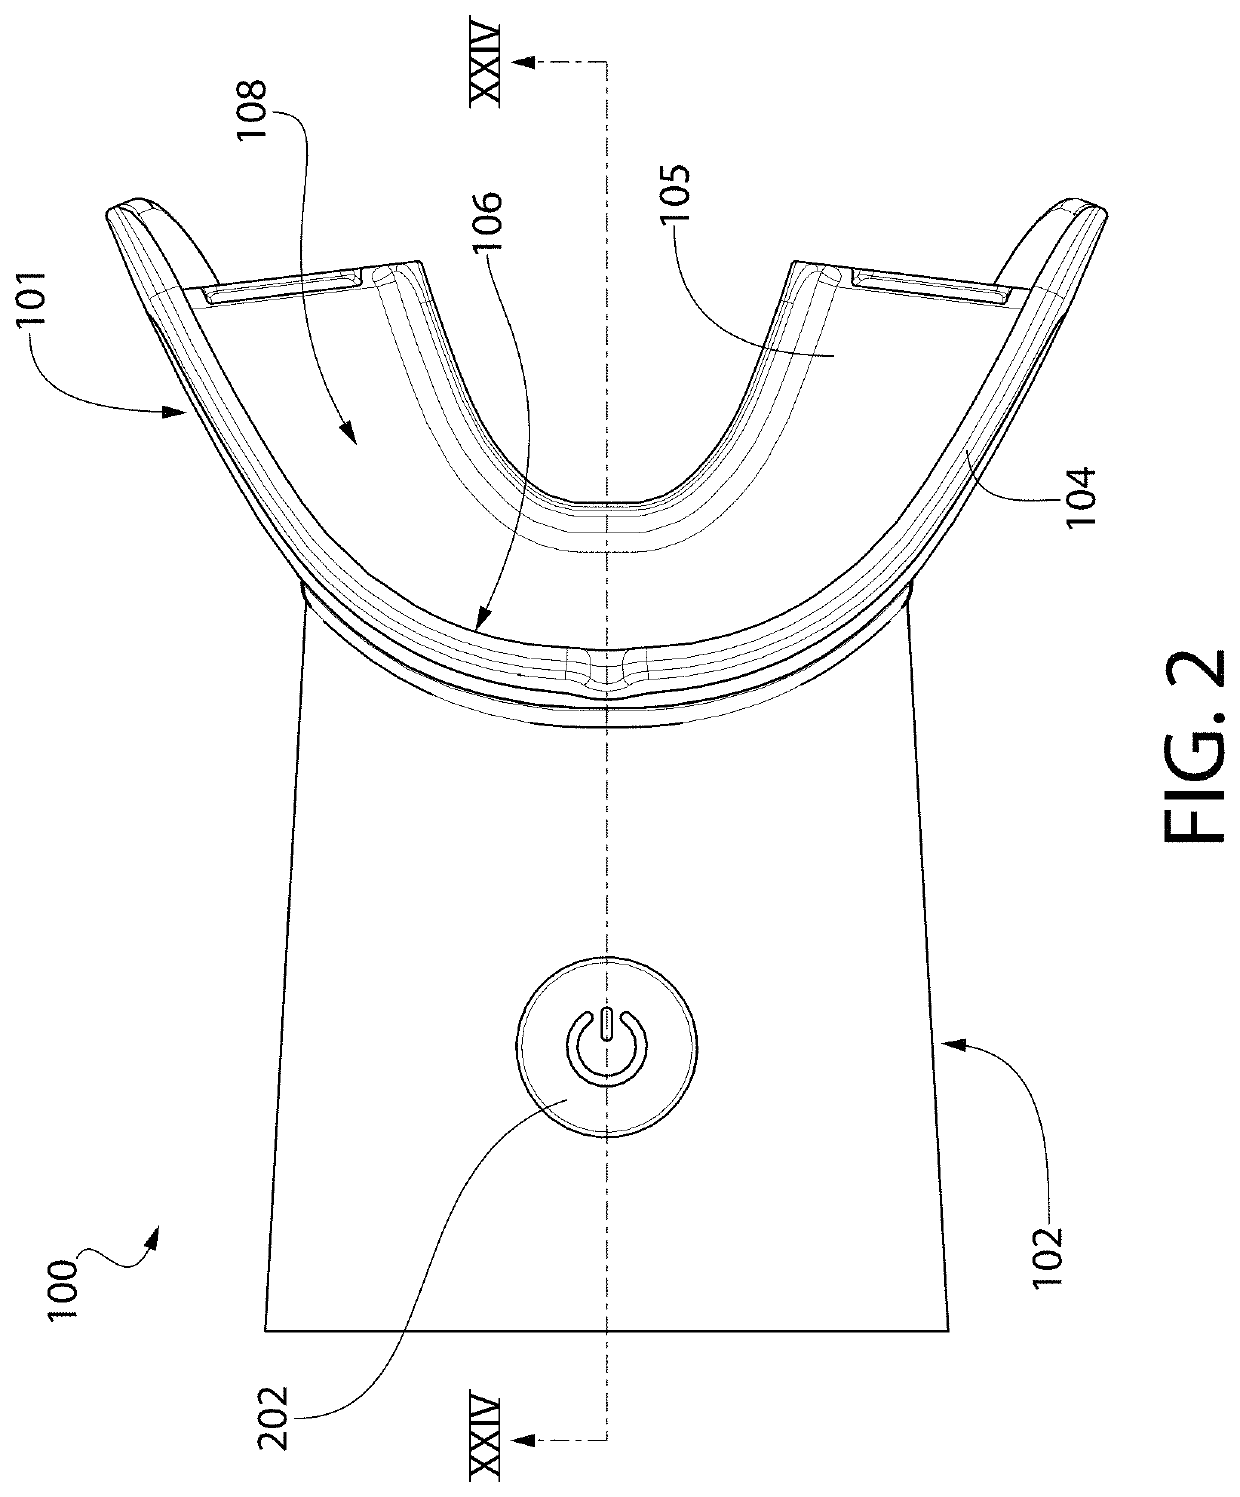 Oral treatment device